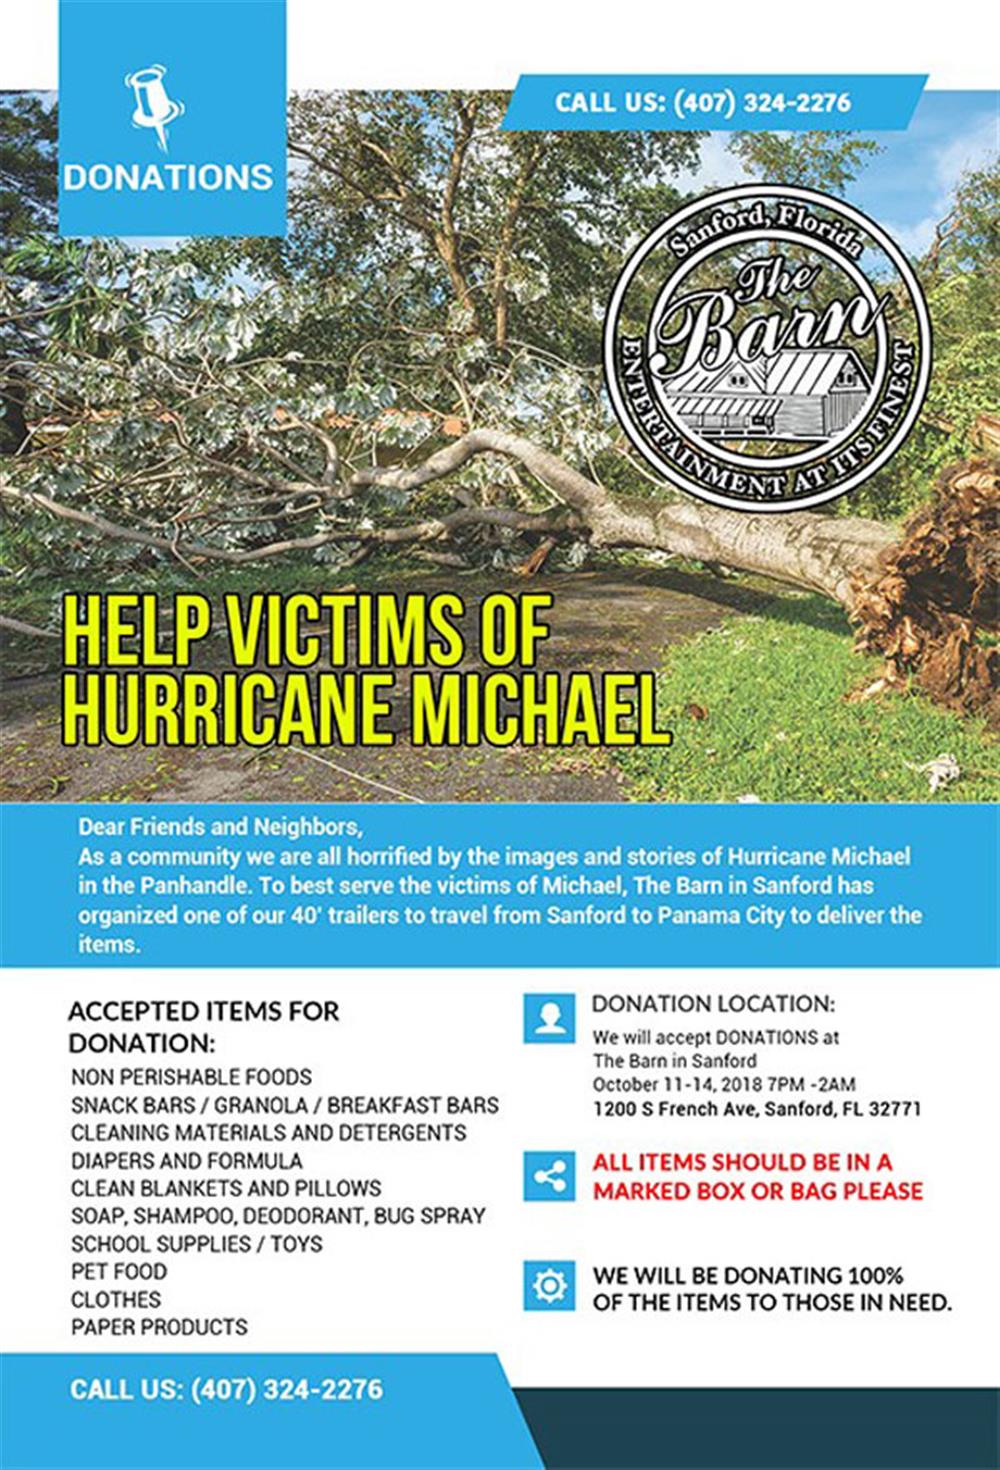 The Barn’s Hurricane Michael Charity: Coming Together to Help the Victims of Hurricane Michael